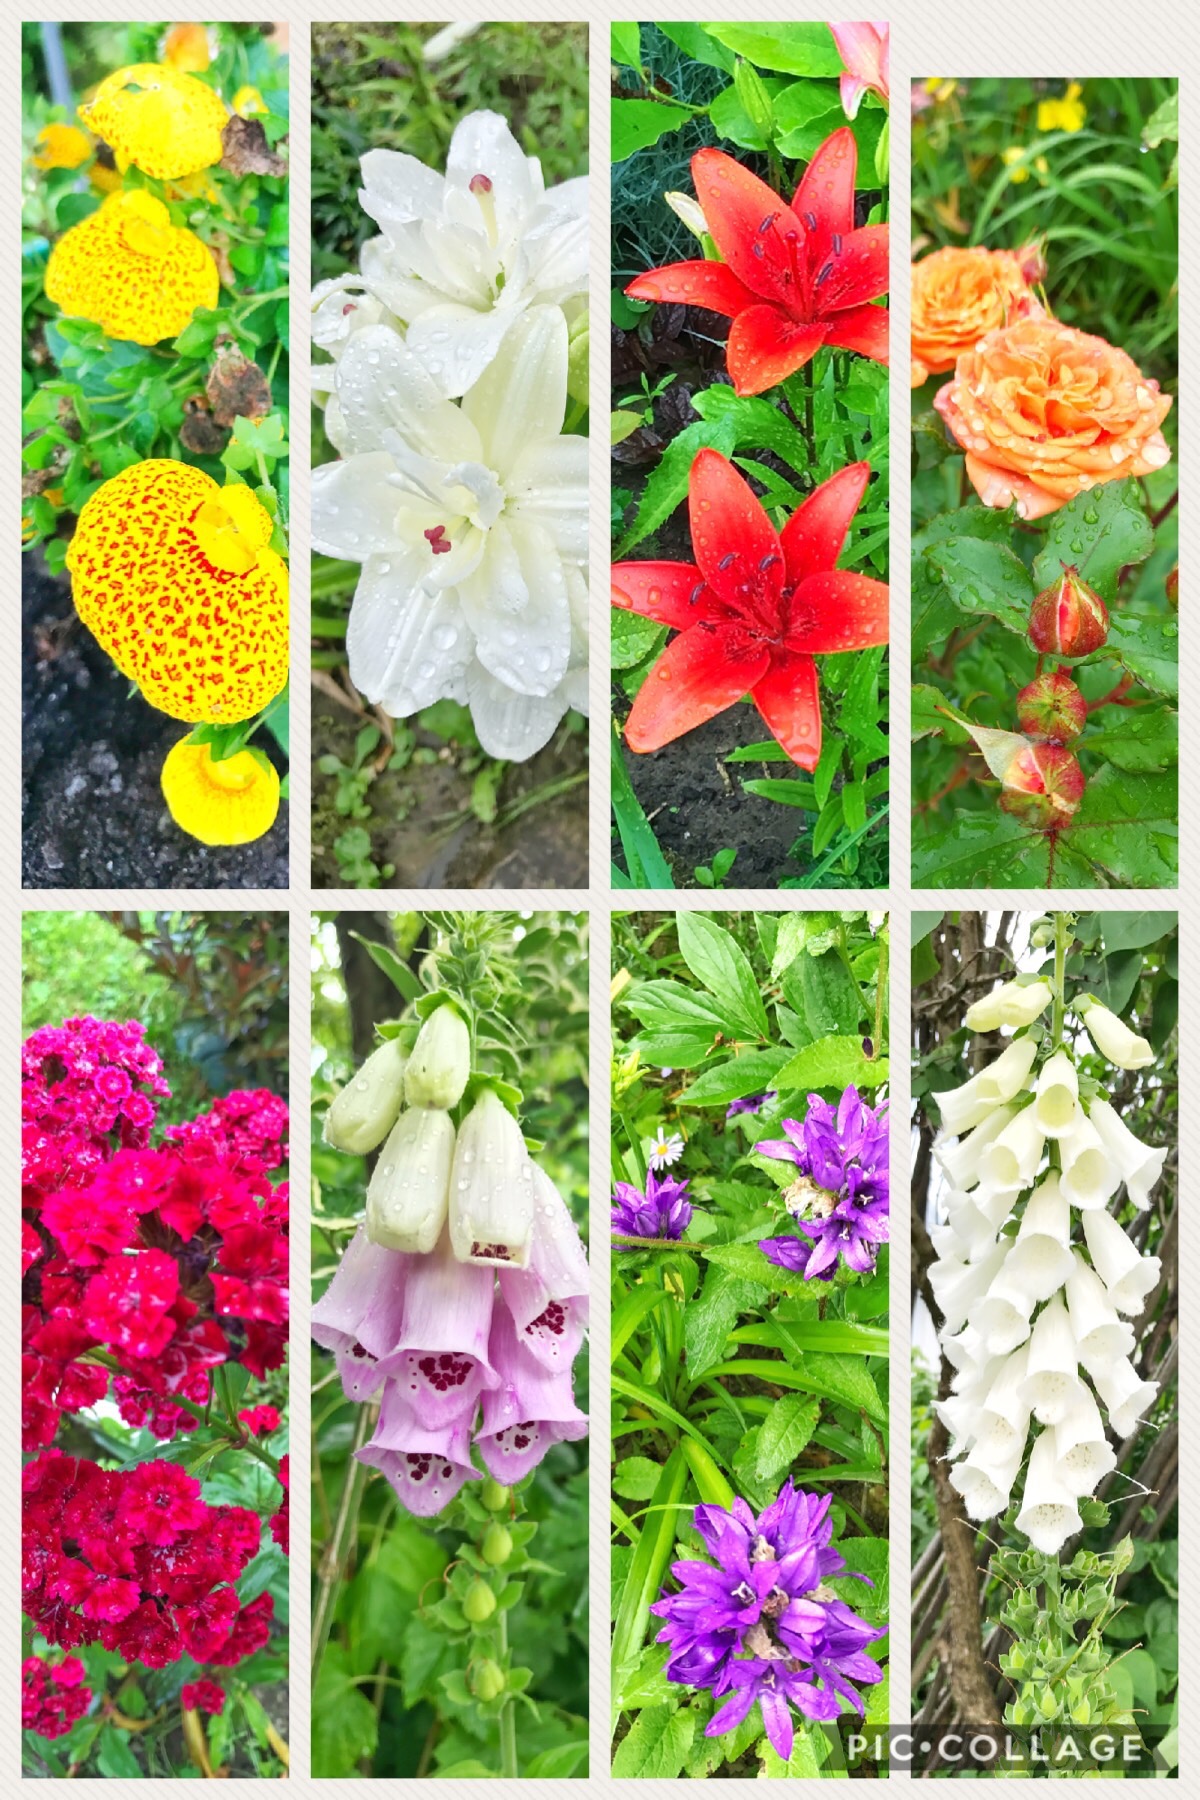  All of these beauties were found in a lovely garden of one of the homes we visit each year. It was definitely a highlight of the trip to gaze on God's amazing creations. :) 